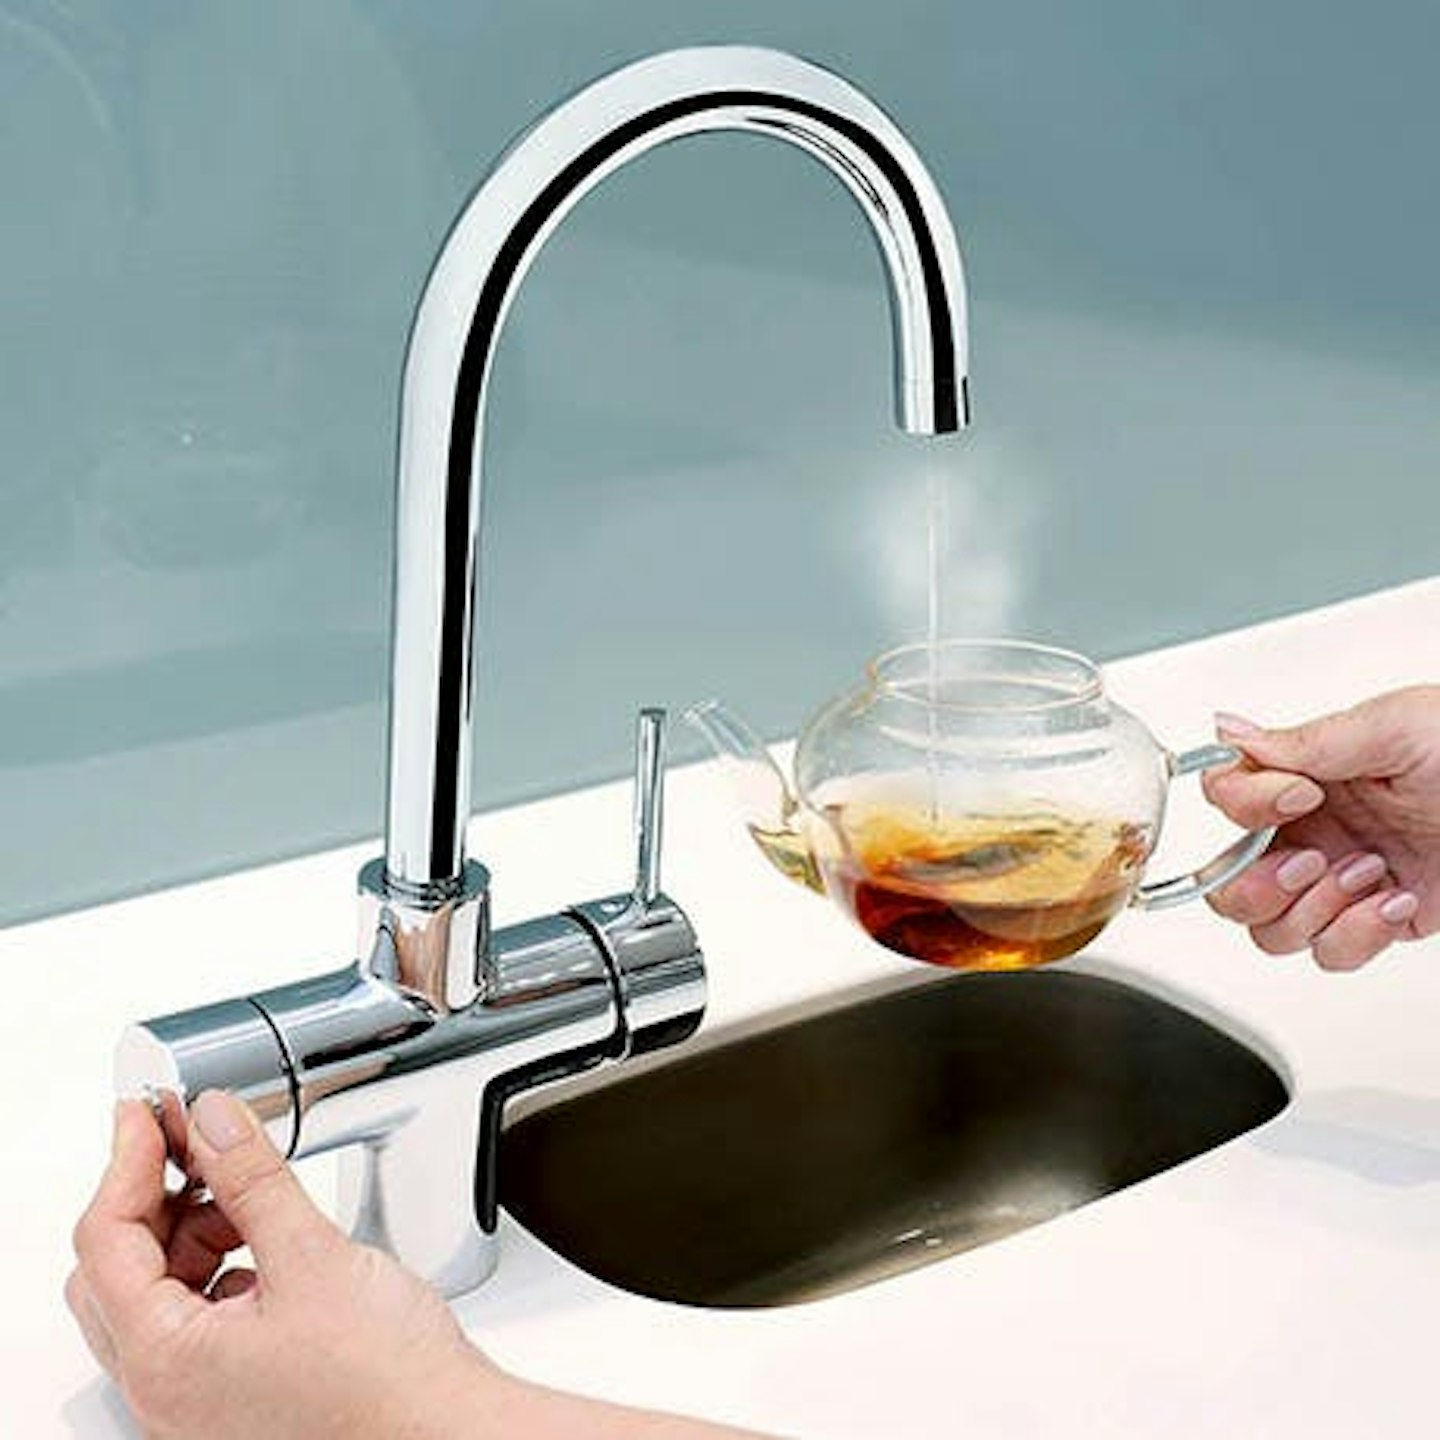 Best boiling water taps: Bristan Gallery Rapid 3-in-1 Boiling Water Kitchen Tap Chrome